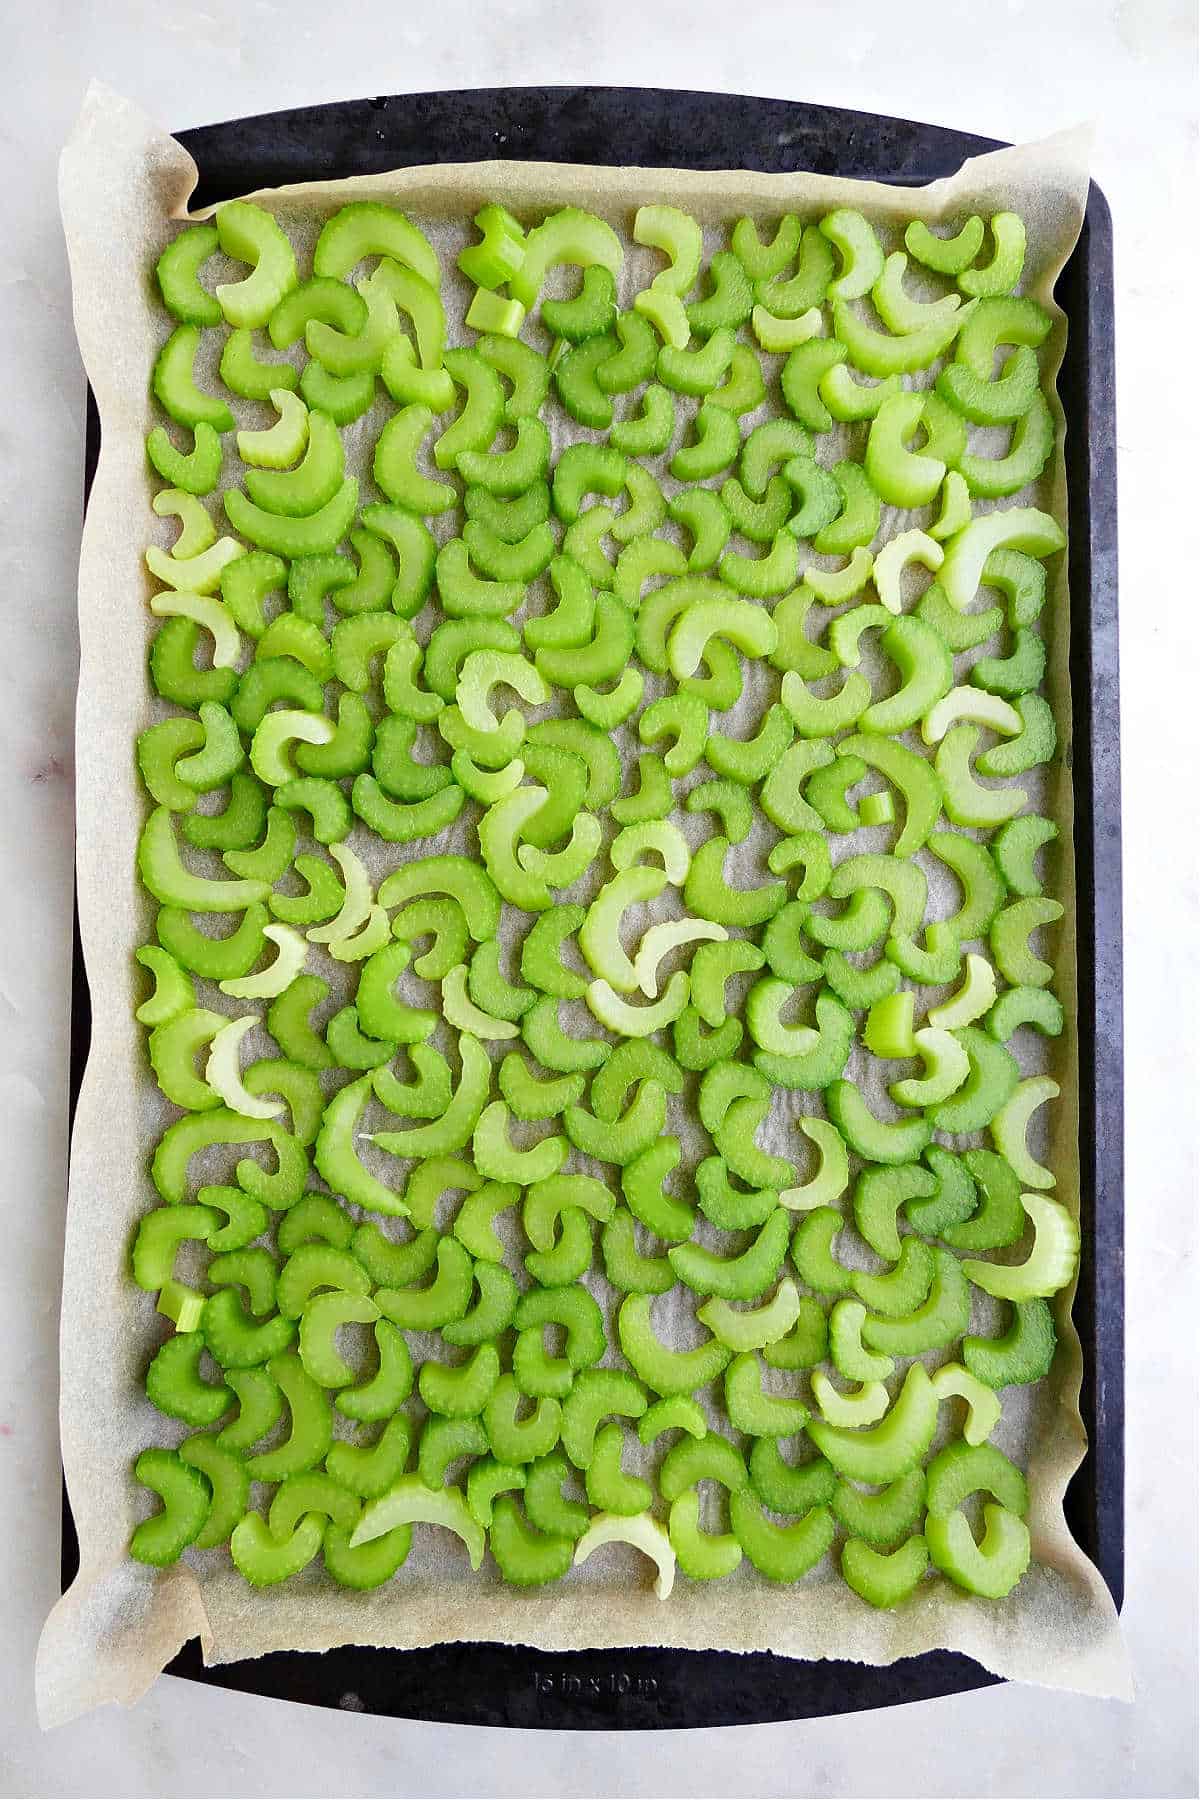 sliced celery spread out on a lined baking sheet for flash freezing